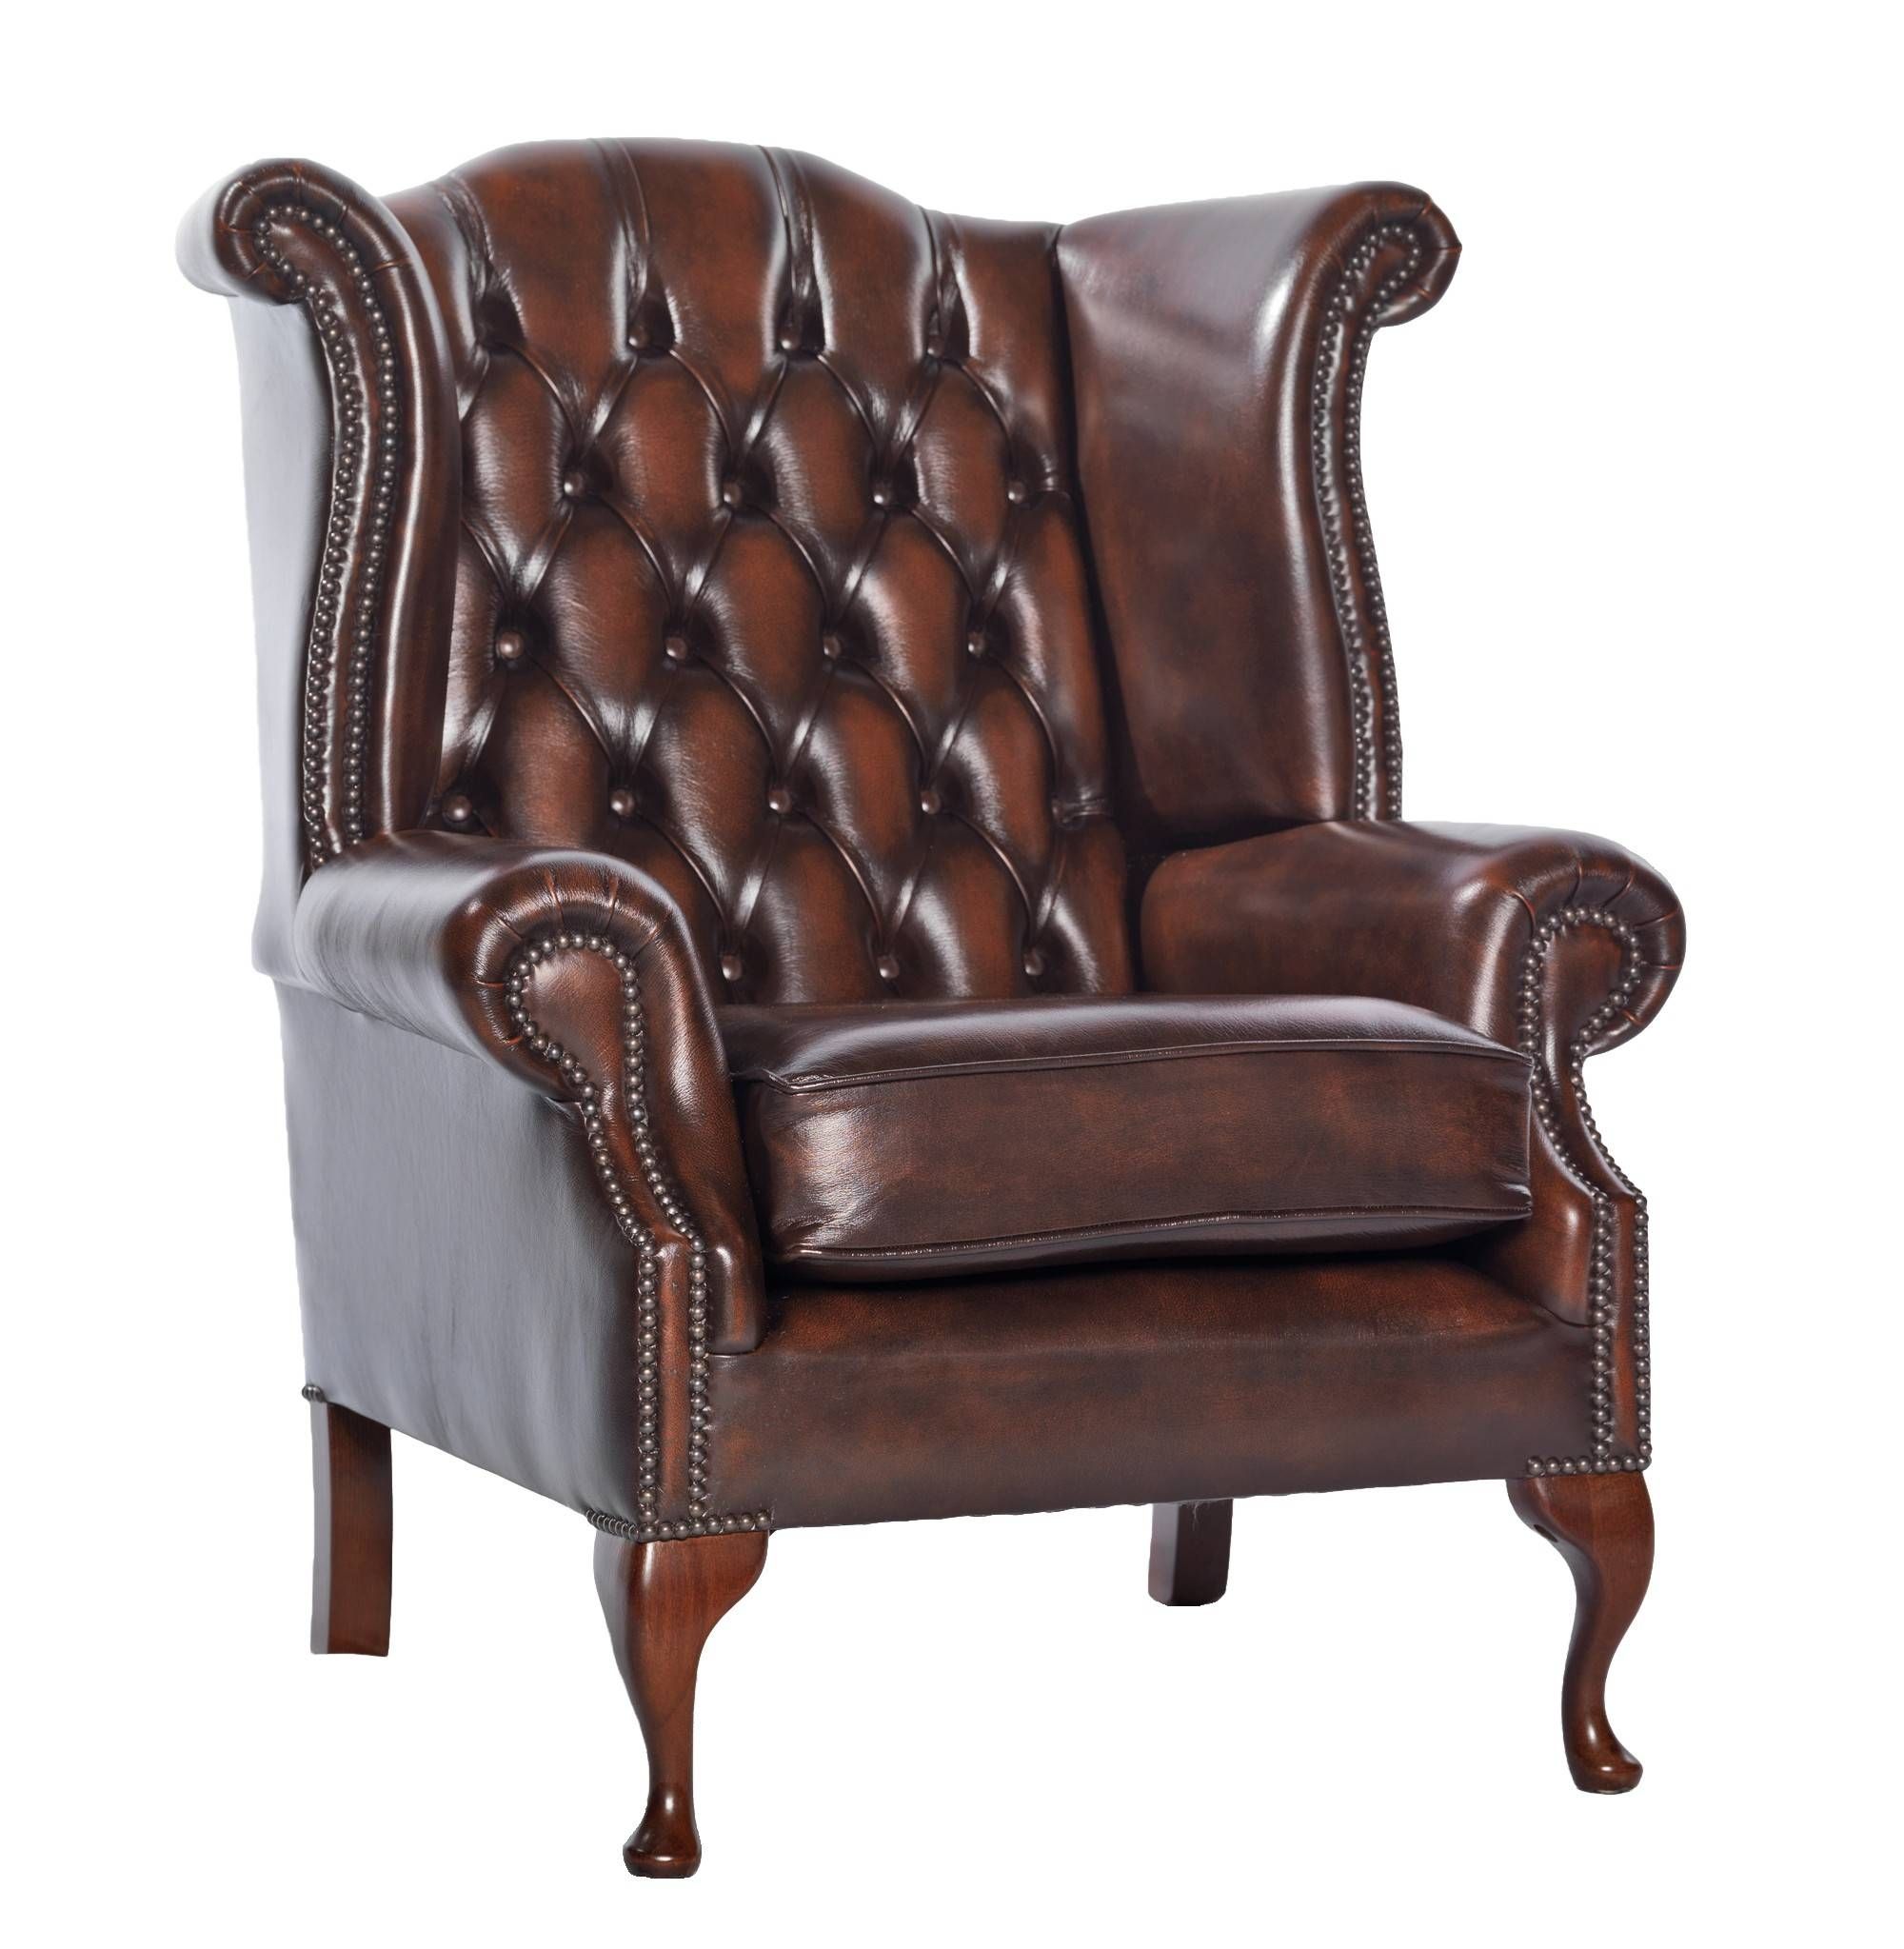 Como Leather Chesterfield Sofa Or Chair – Leather Sofas And Chairs Inside Chesterfield Sofa And Chairs (View 7 of 30)